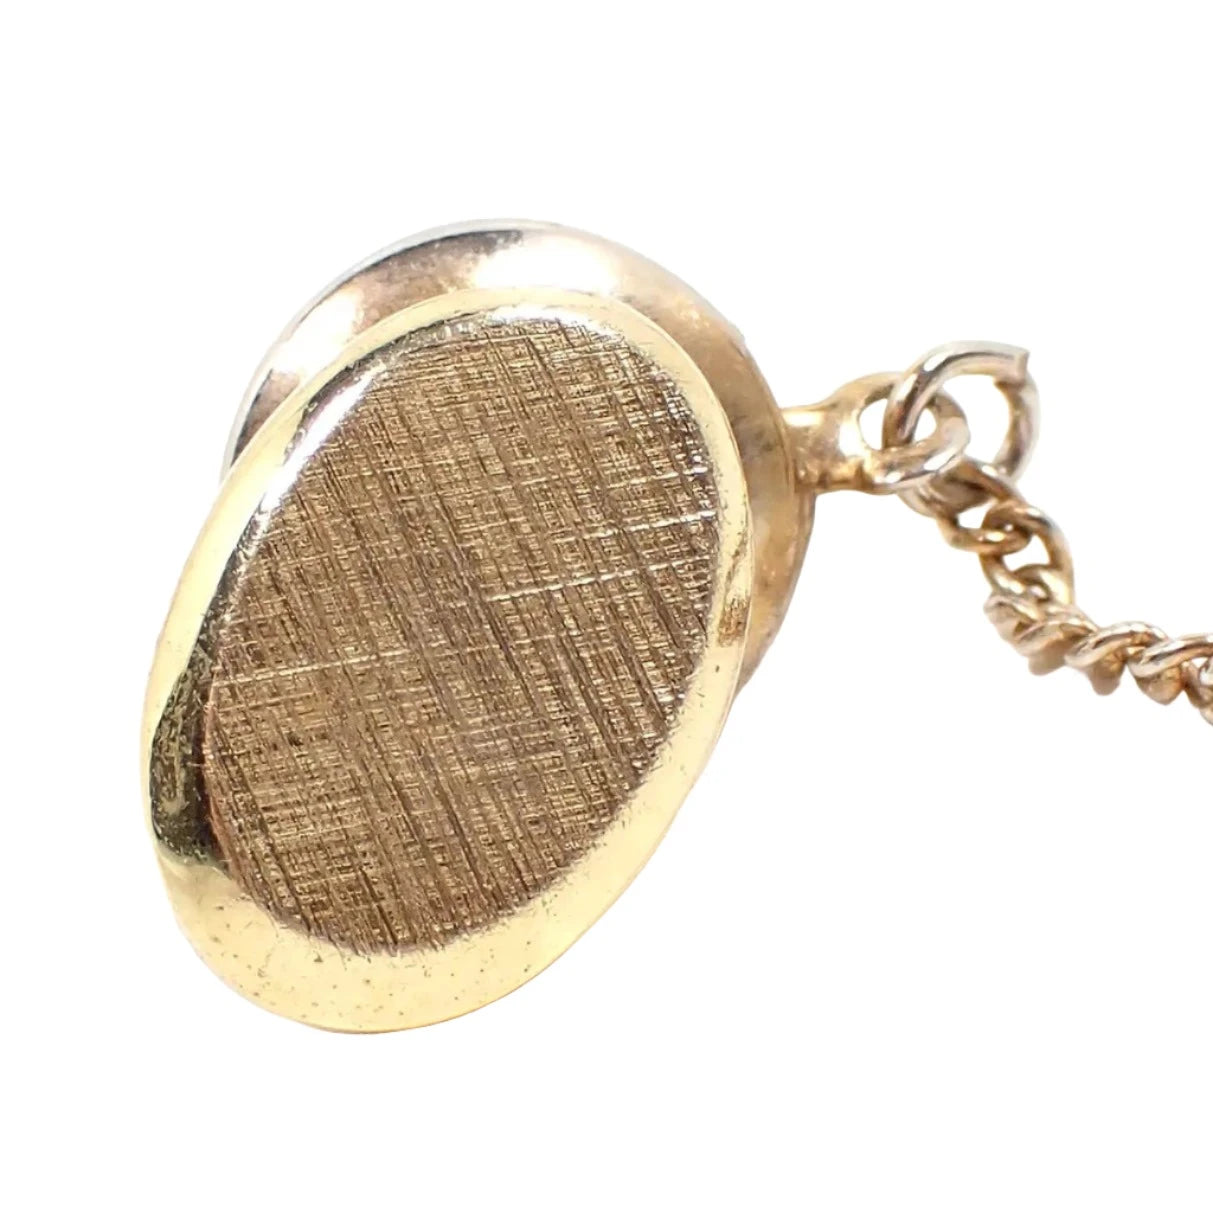 Front view of the Mid Century vintage tie tack. The metal is gold tone in color and the front has a brushed textured matte appearance. It is oval shaped and the clutch back with chain can be seen in the photo.